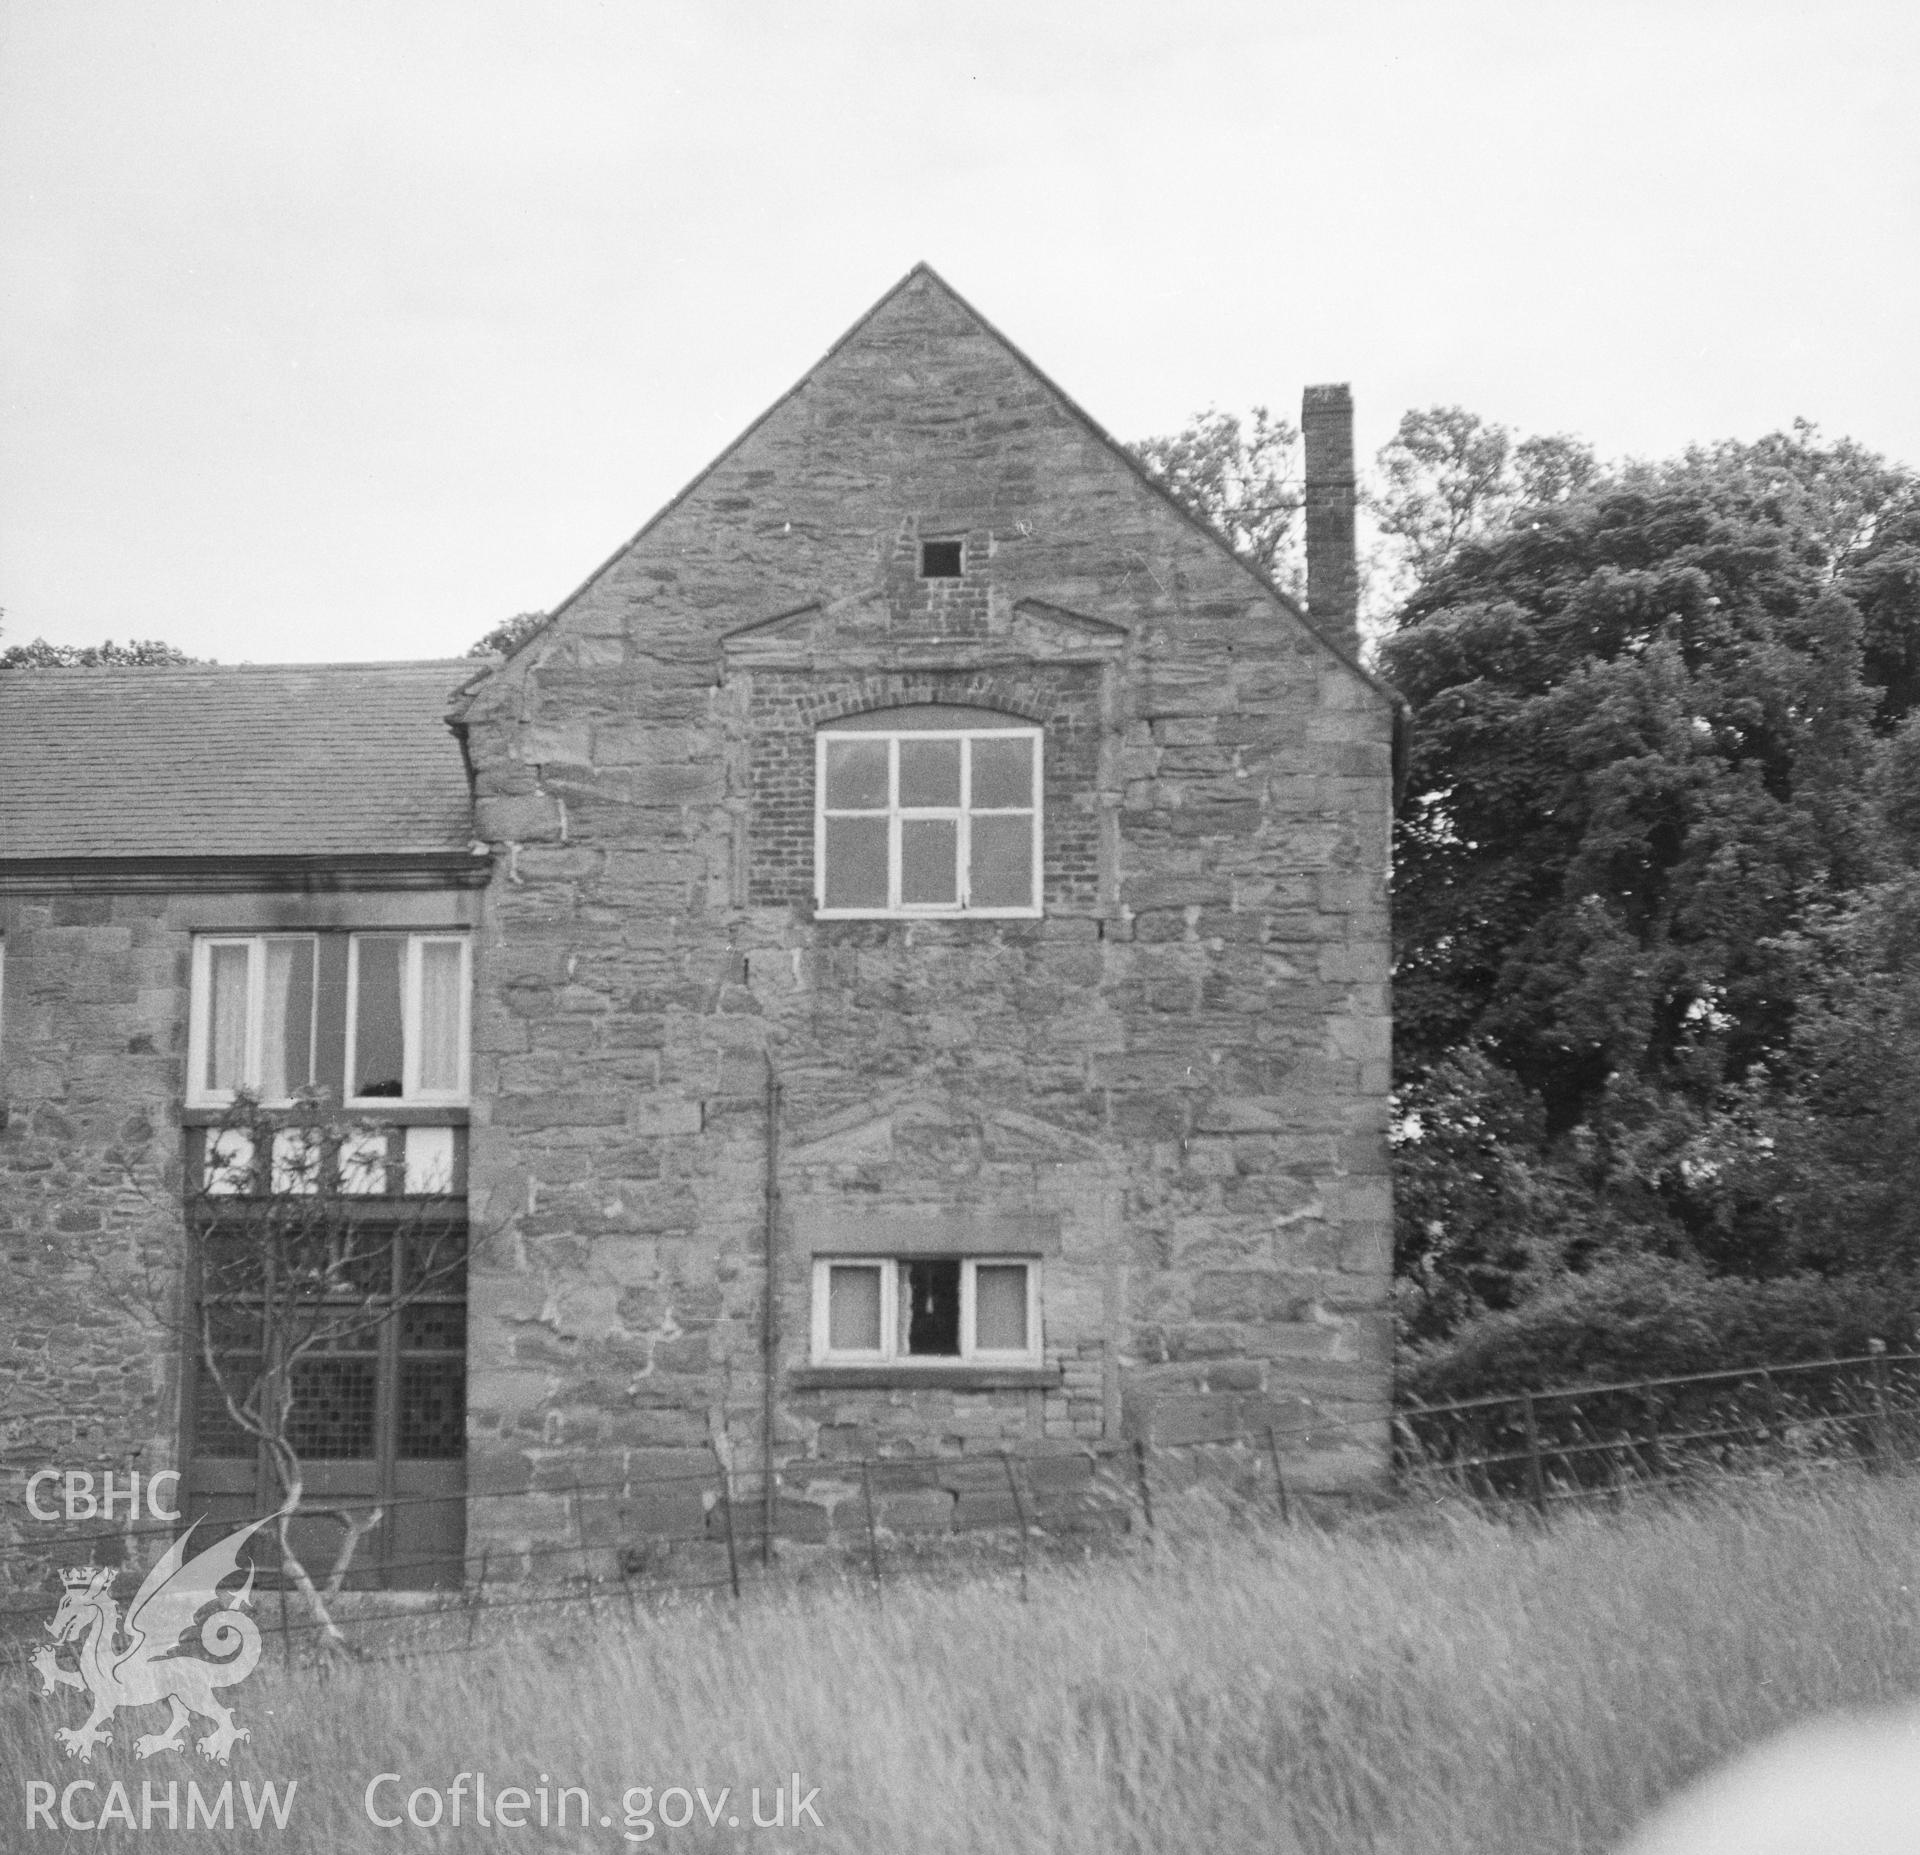 Digital copy of a black and white nitrate negative showing exterior view, Llyseurgain, Northop.